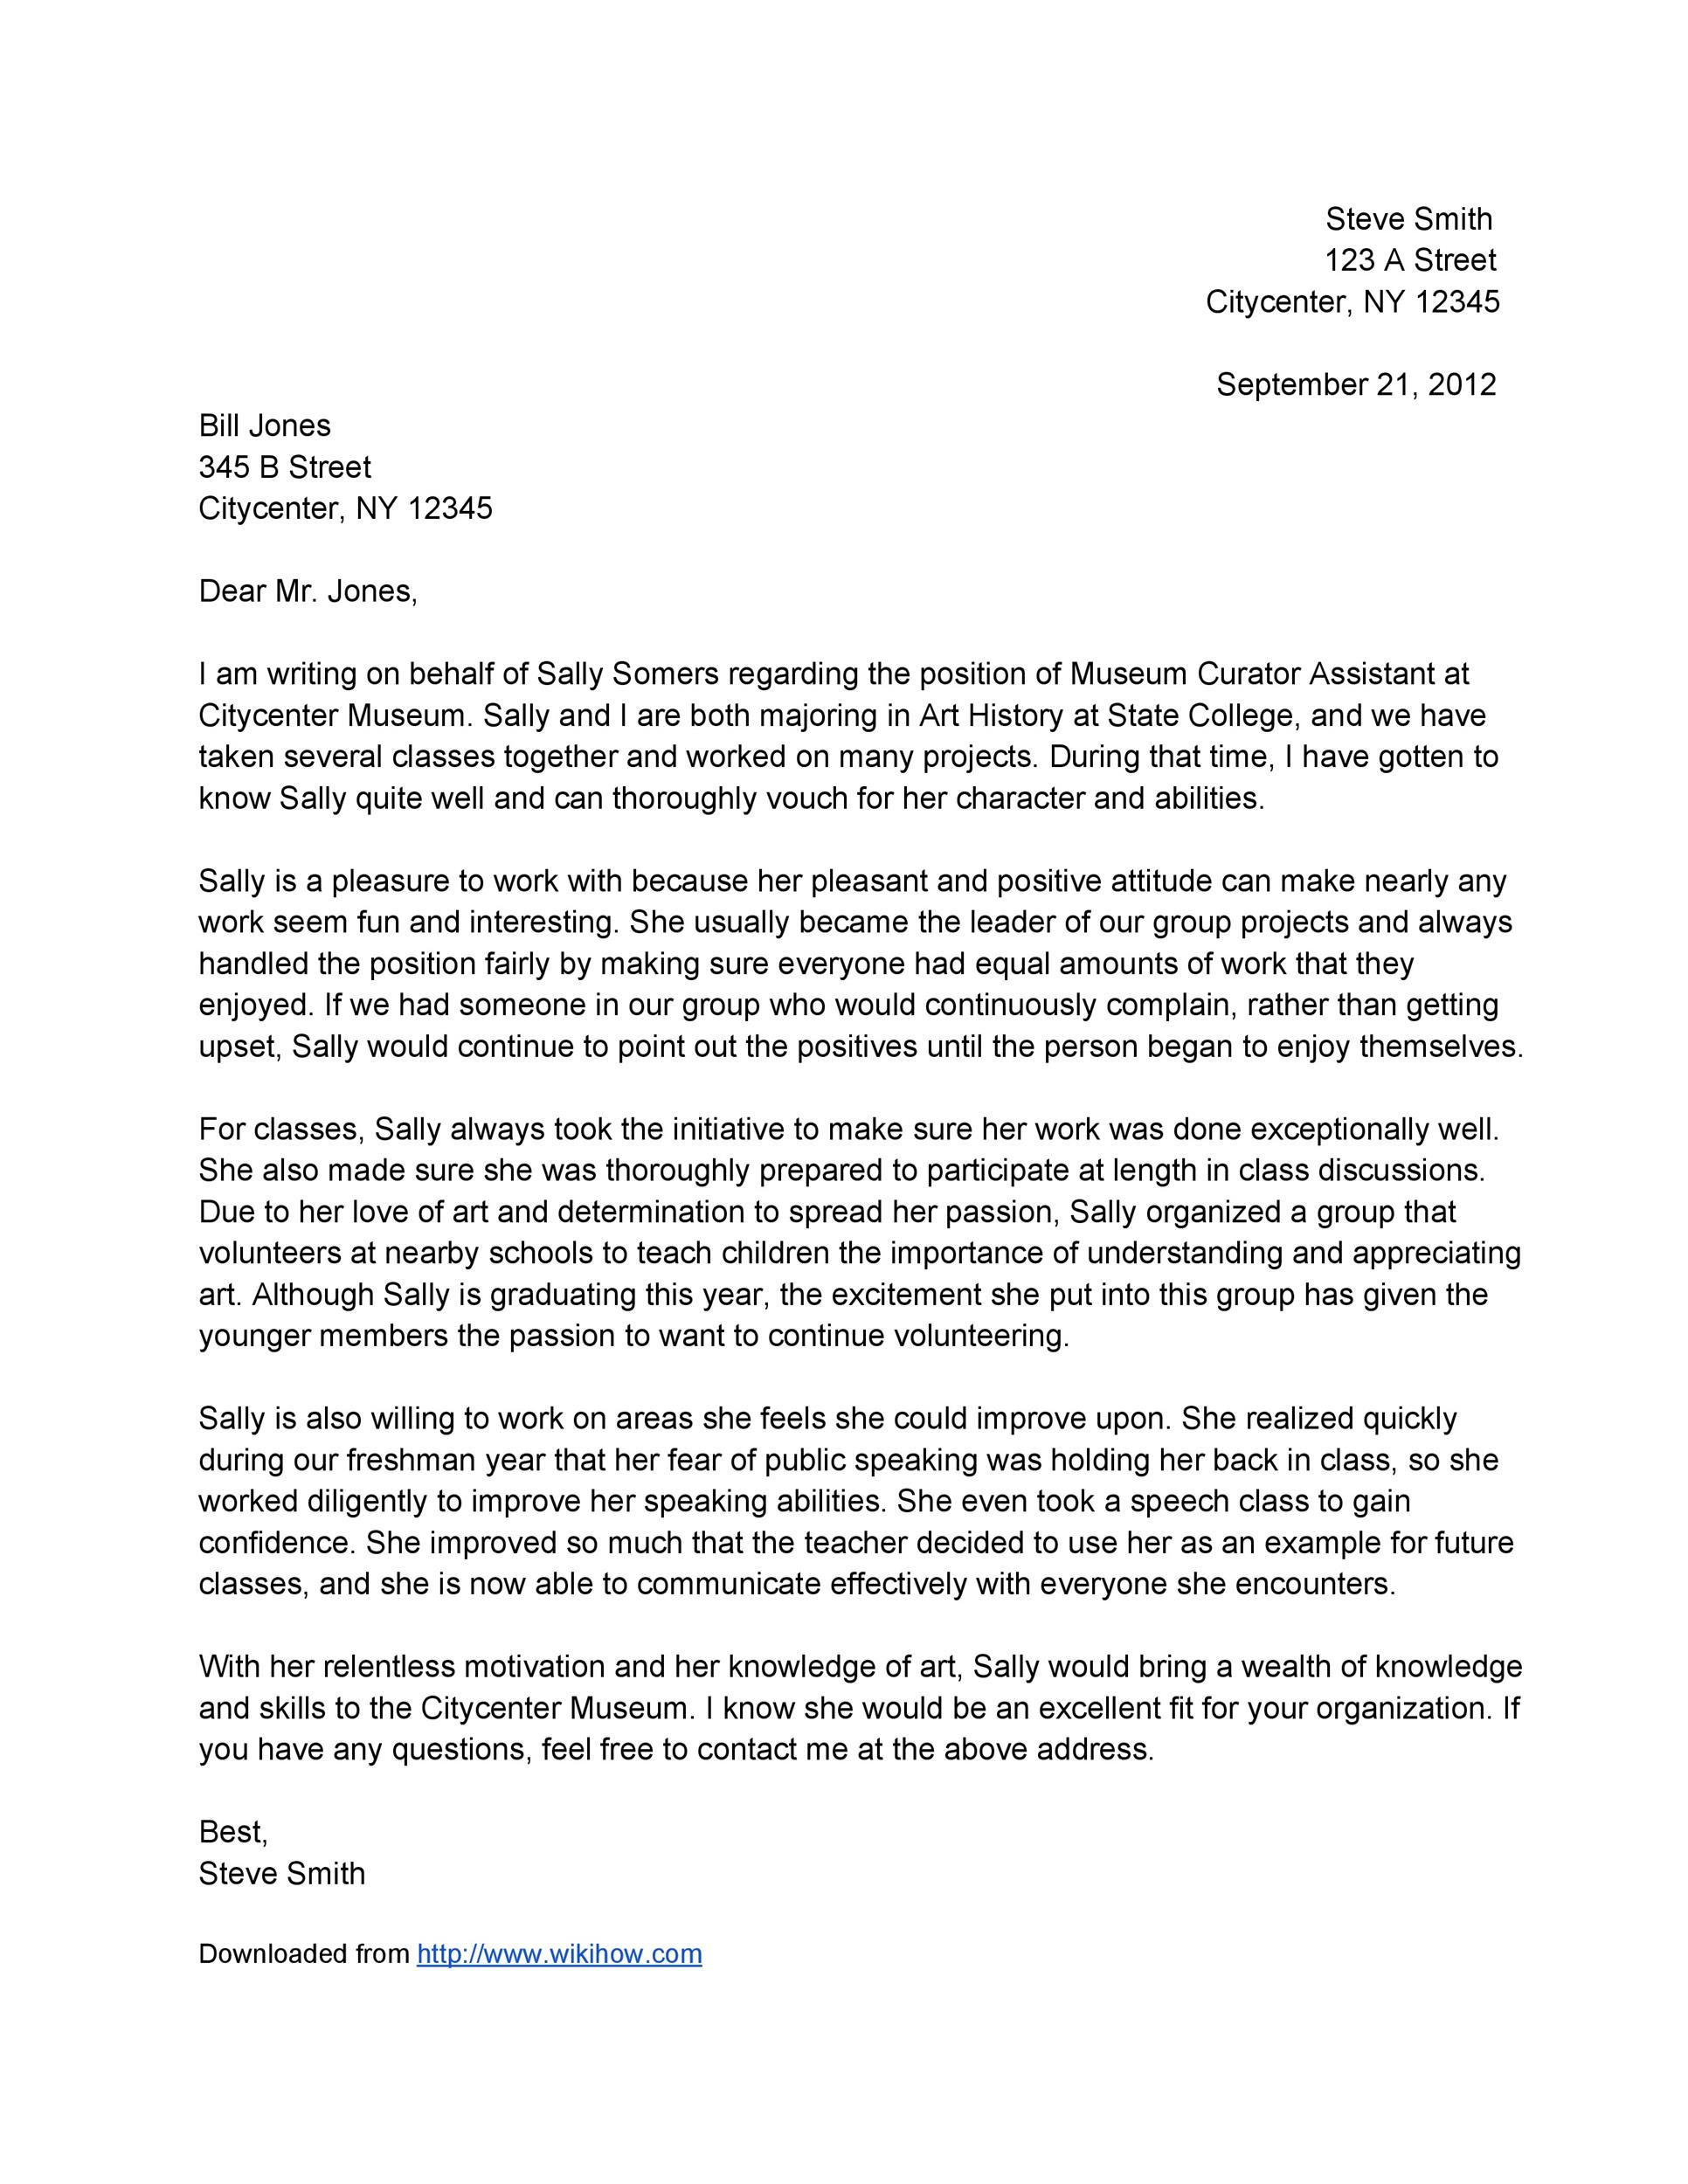 Letter Of Recommendation For College Samples from templatelab.com